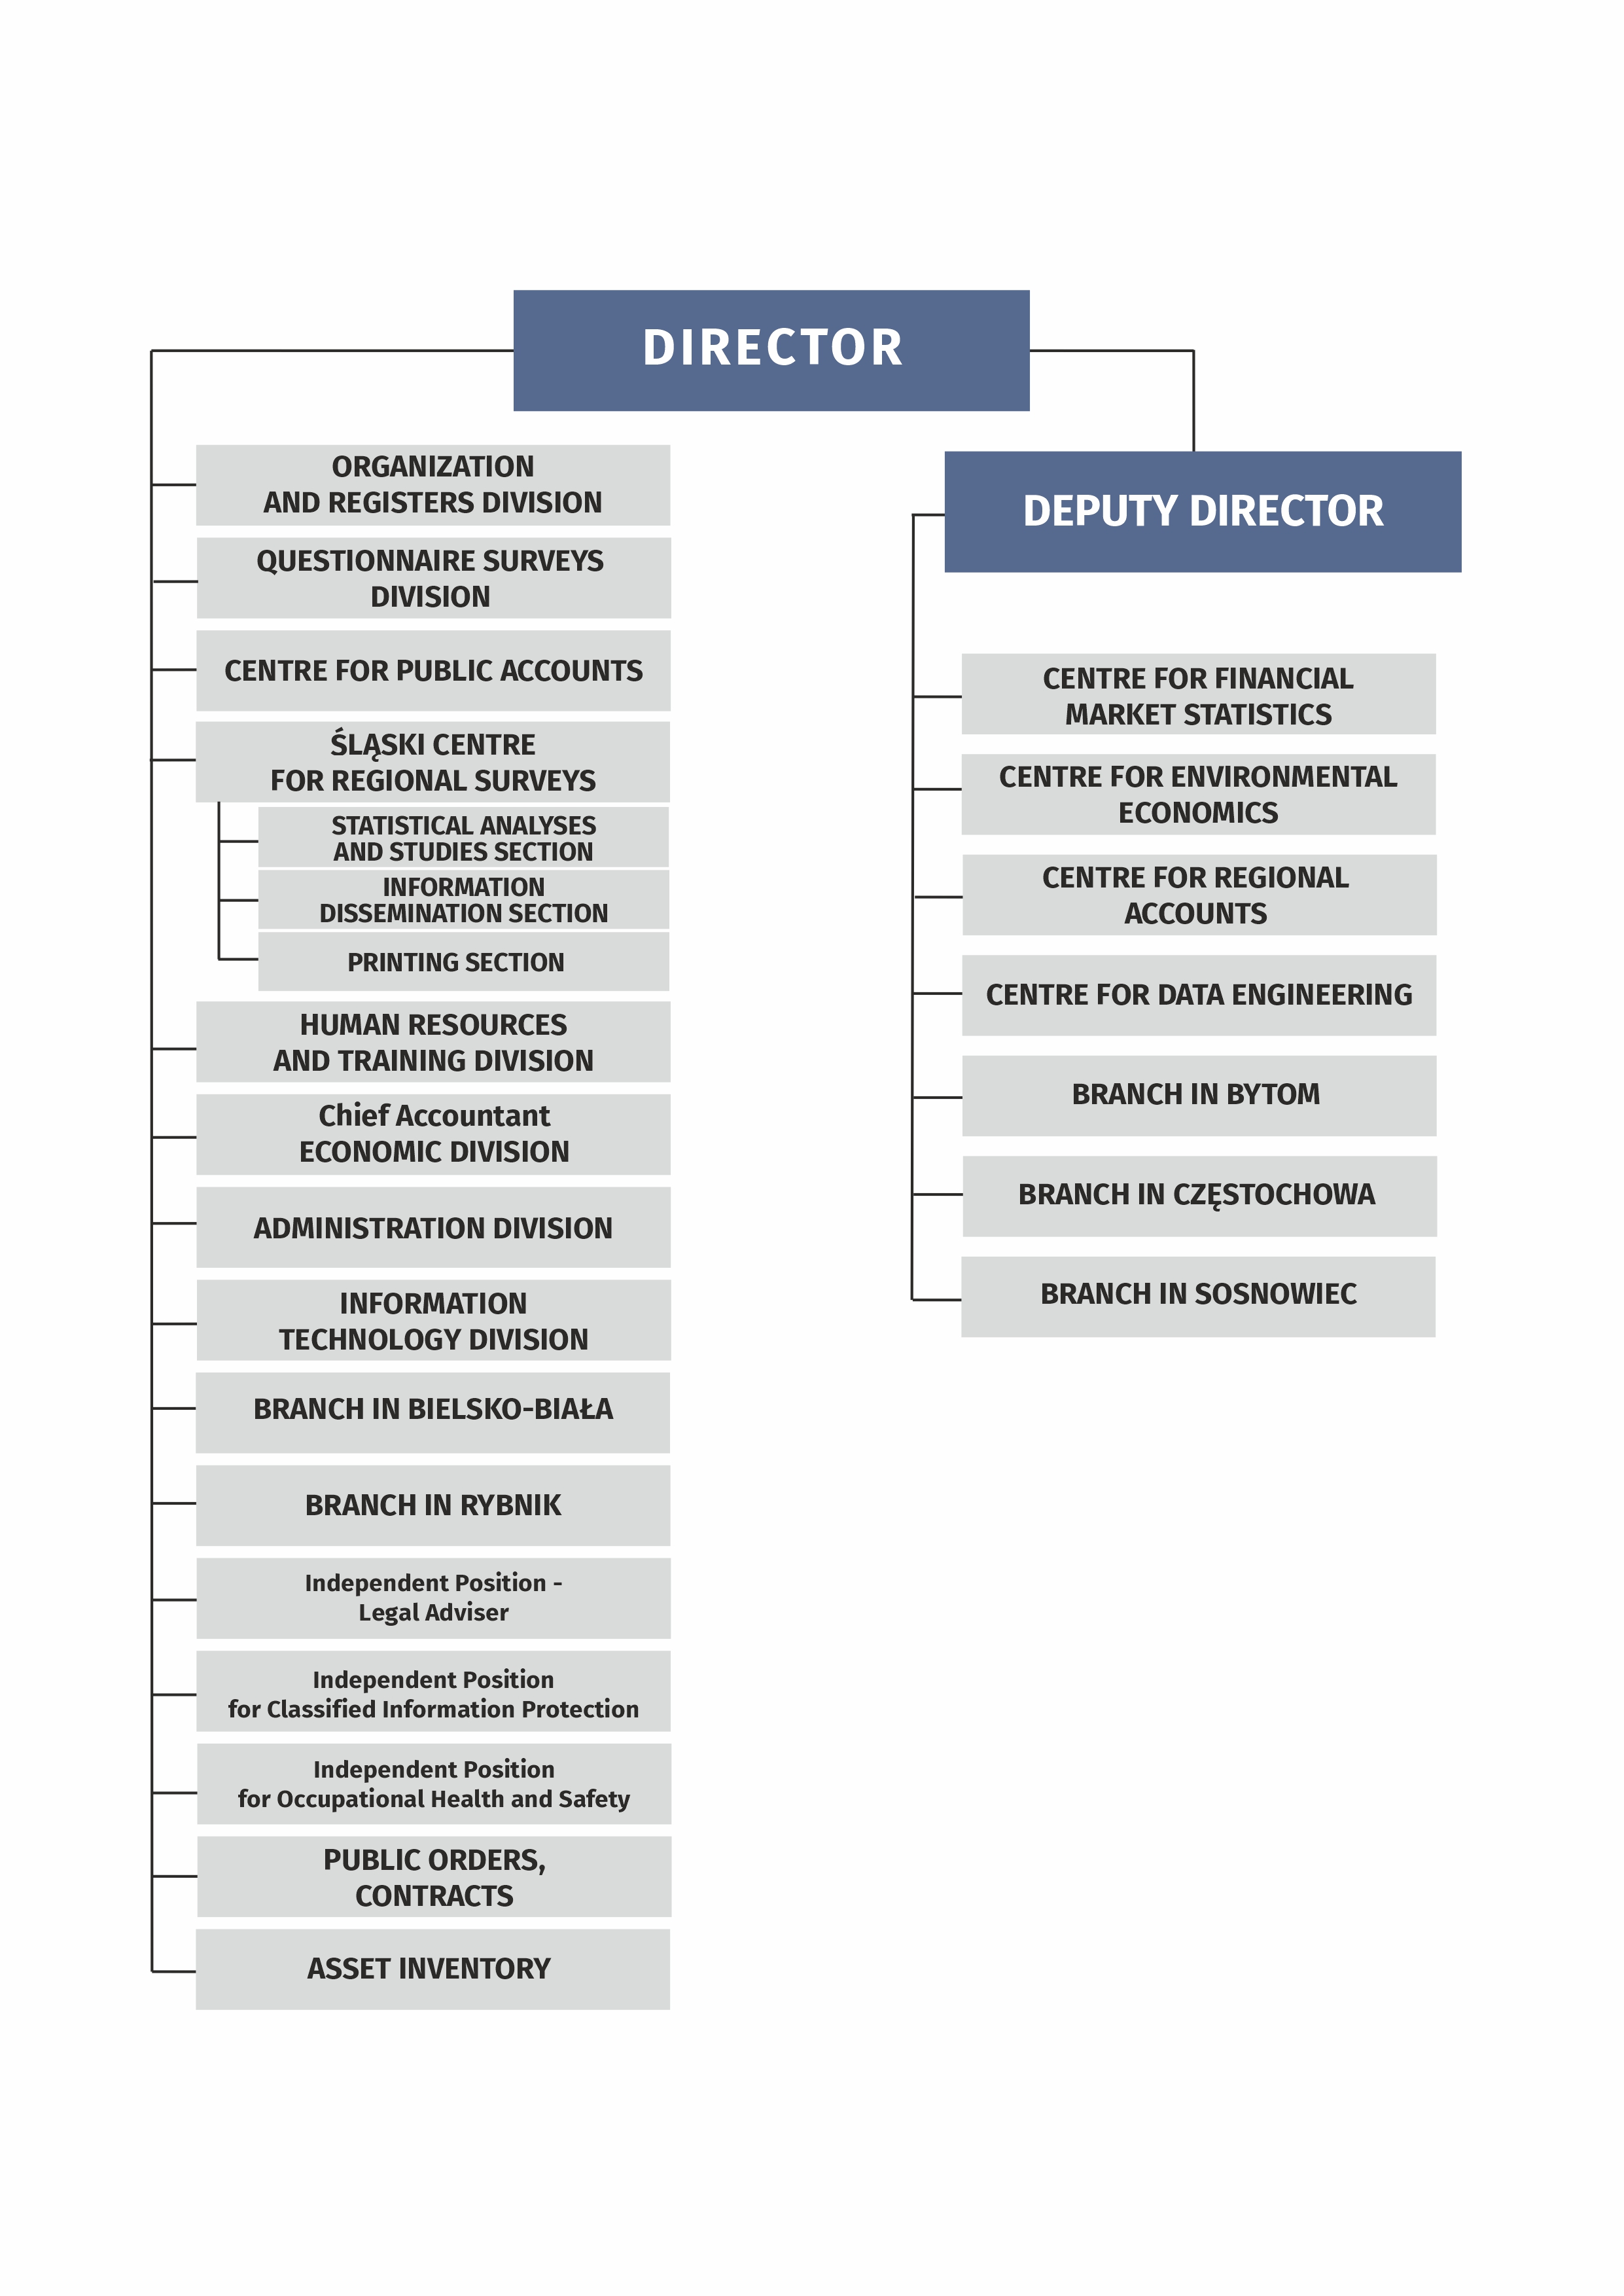 Organizational structure of the Statistical Office in Katowice